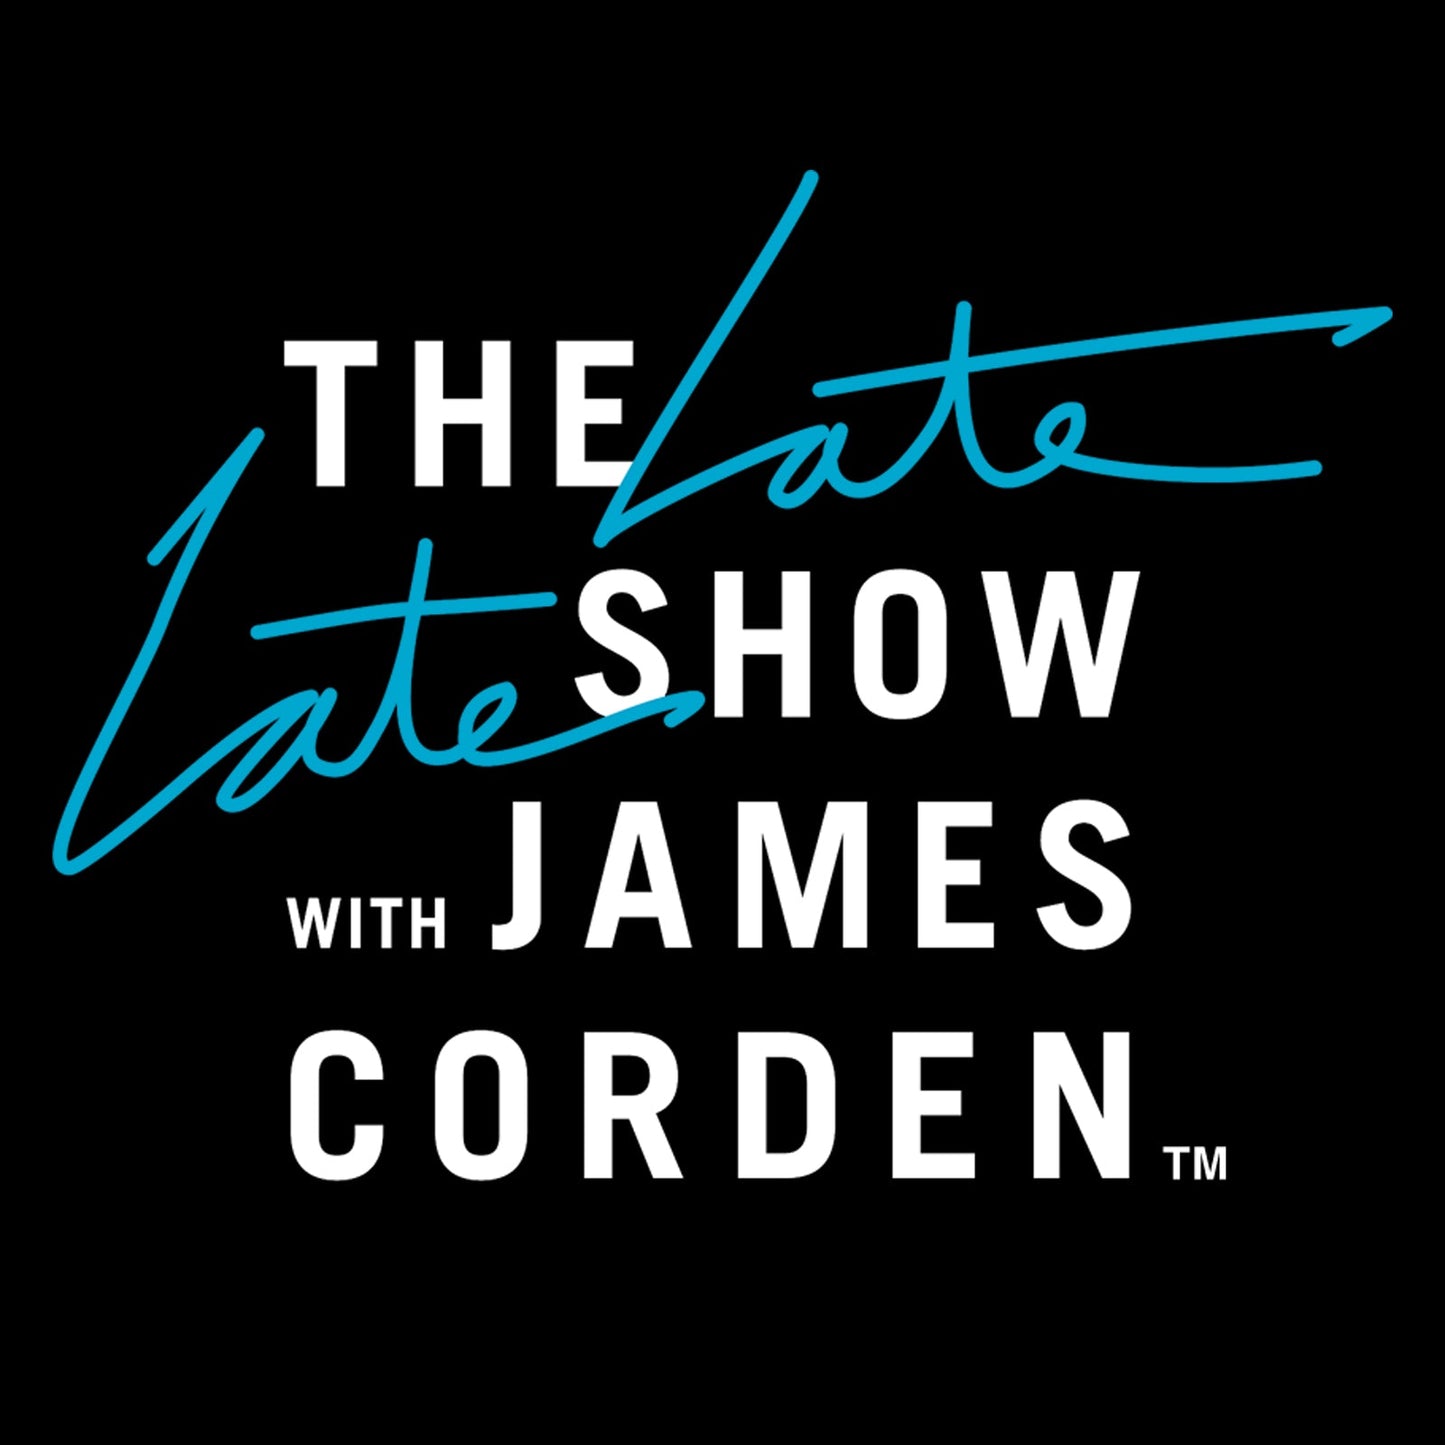 The Late Late Show with James Corden Logo Embroidered Hat